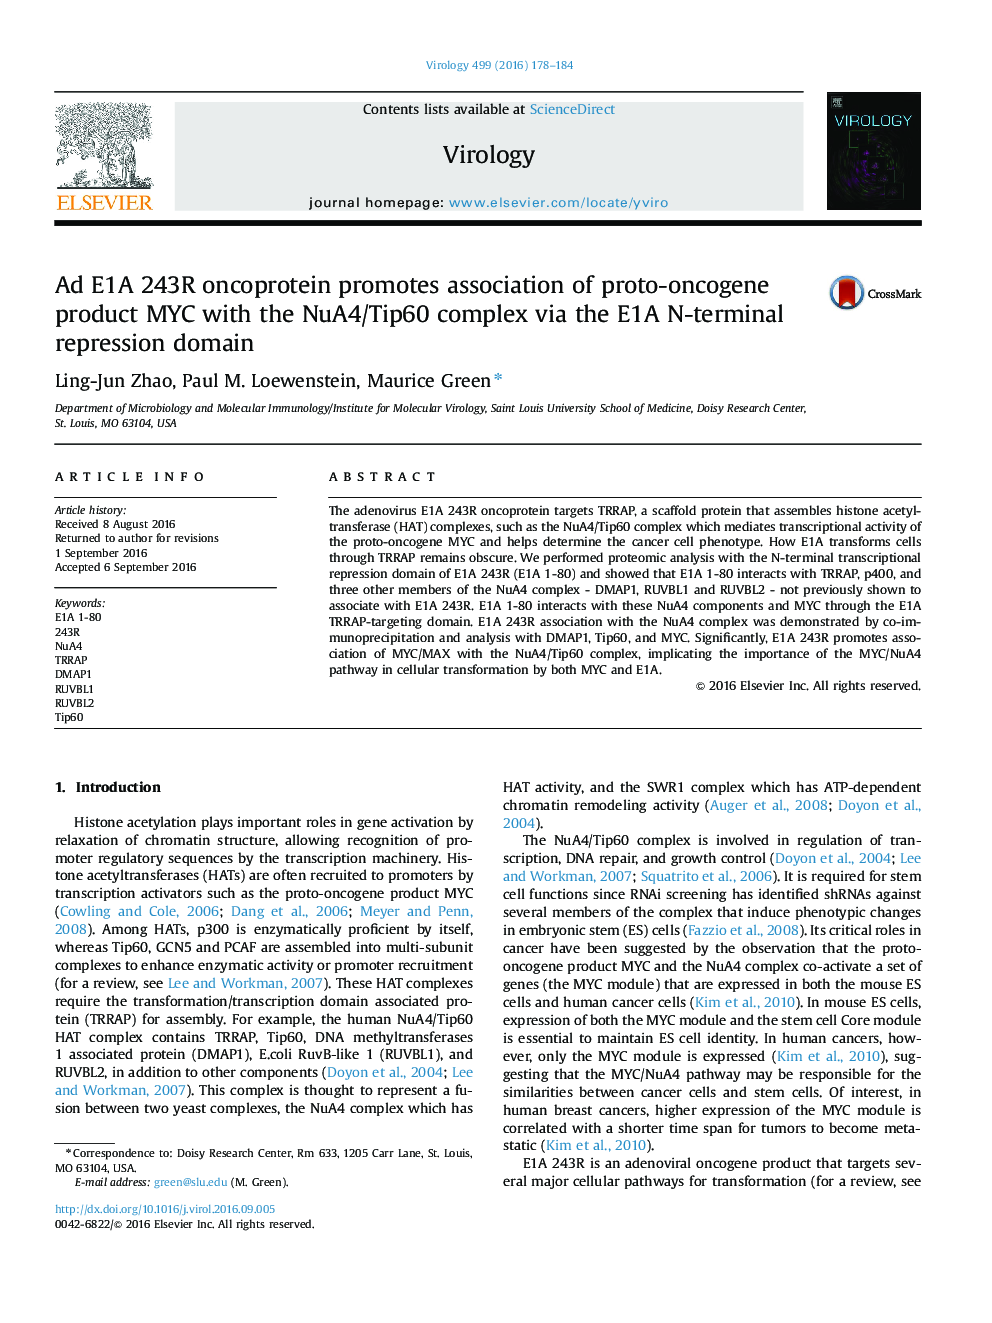 Ad E1A 243R oncoprotein promotes association of proto-oncogene product MYC with the NuA4/Tip60 complex via the E1A N-terminal repression domain